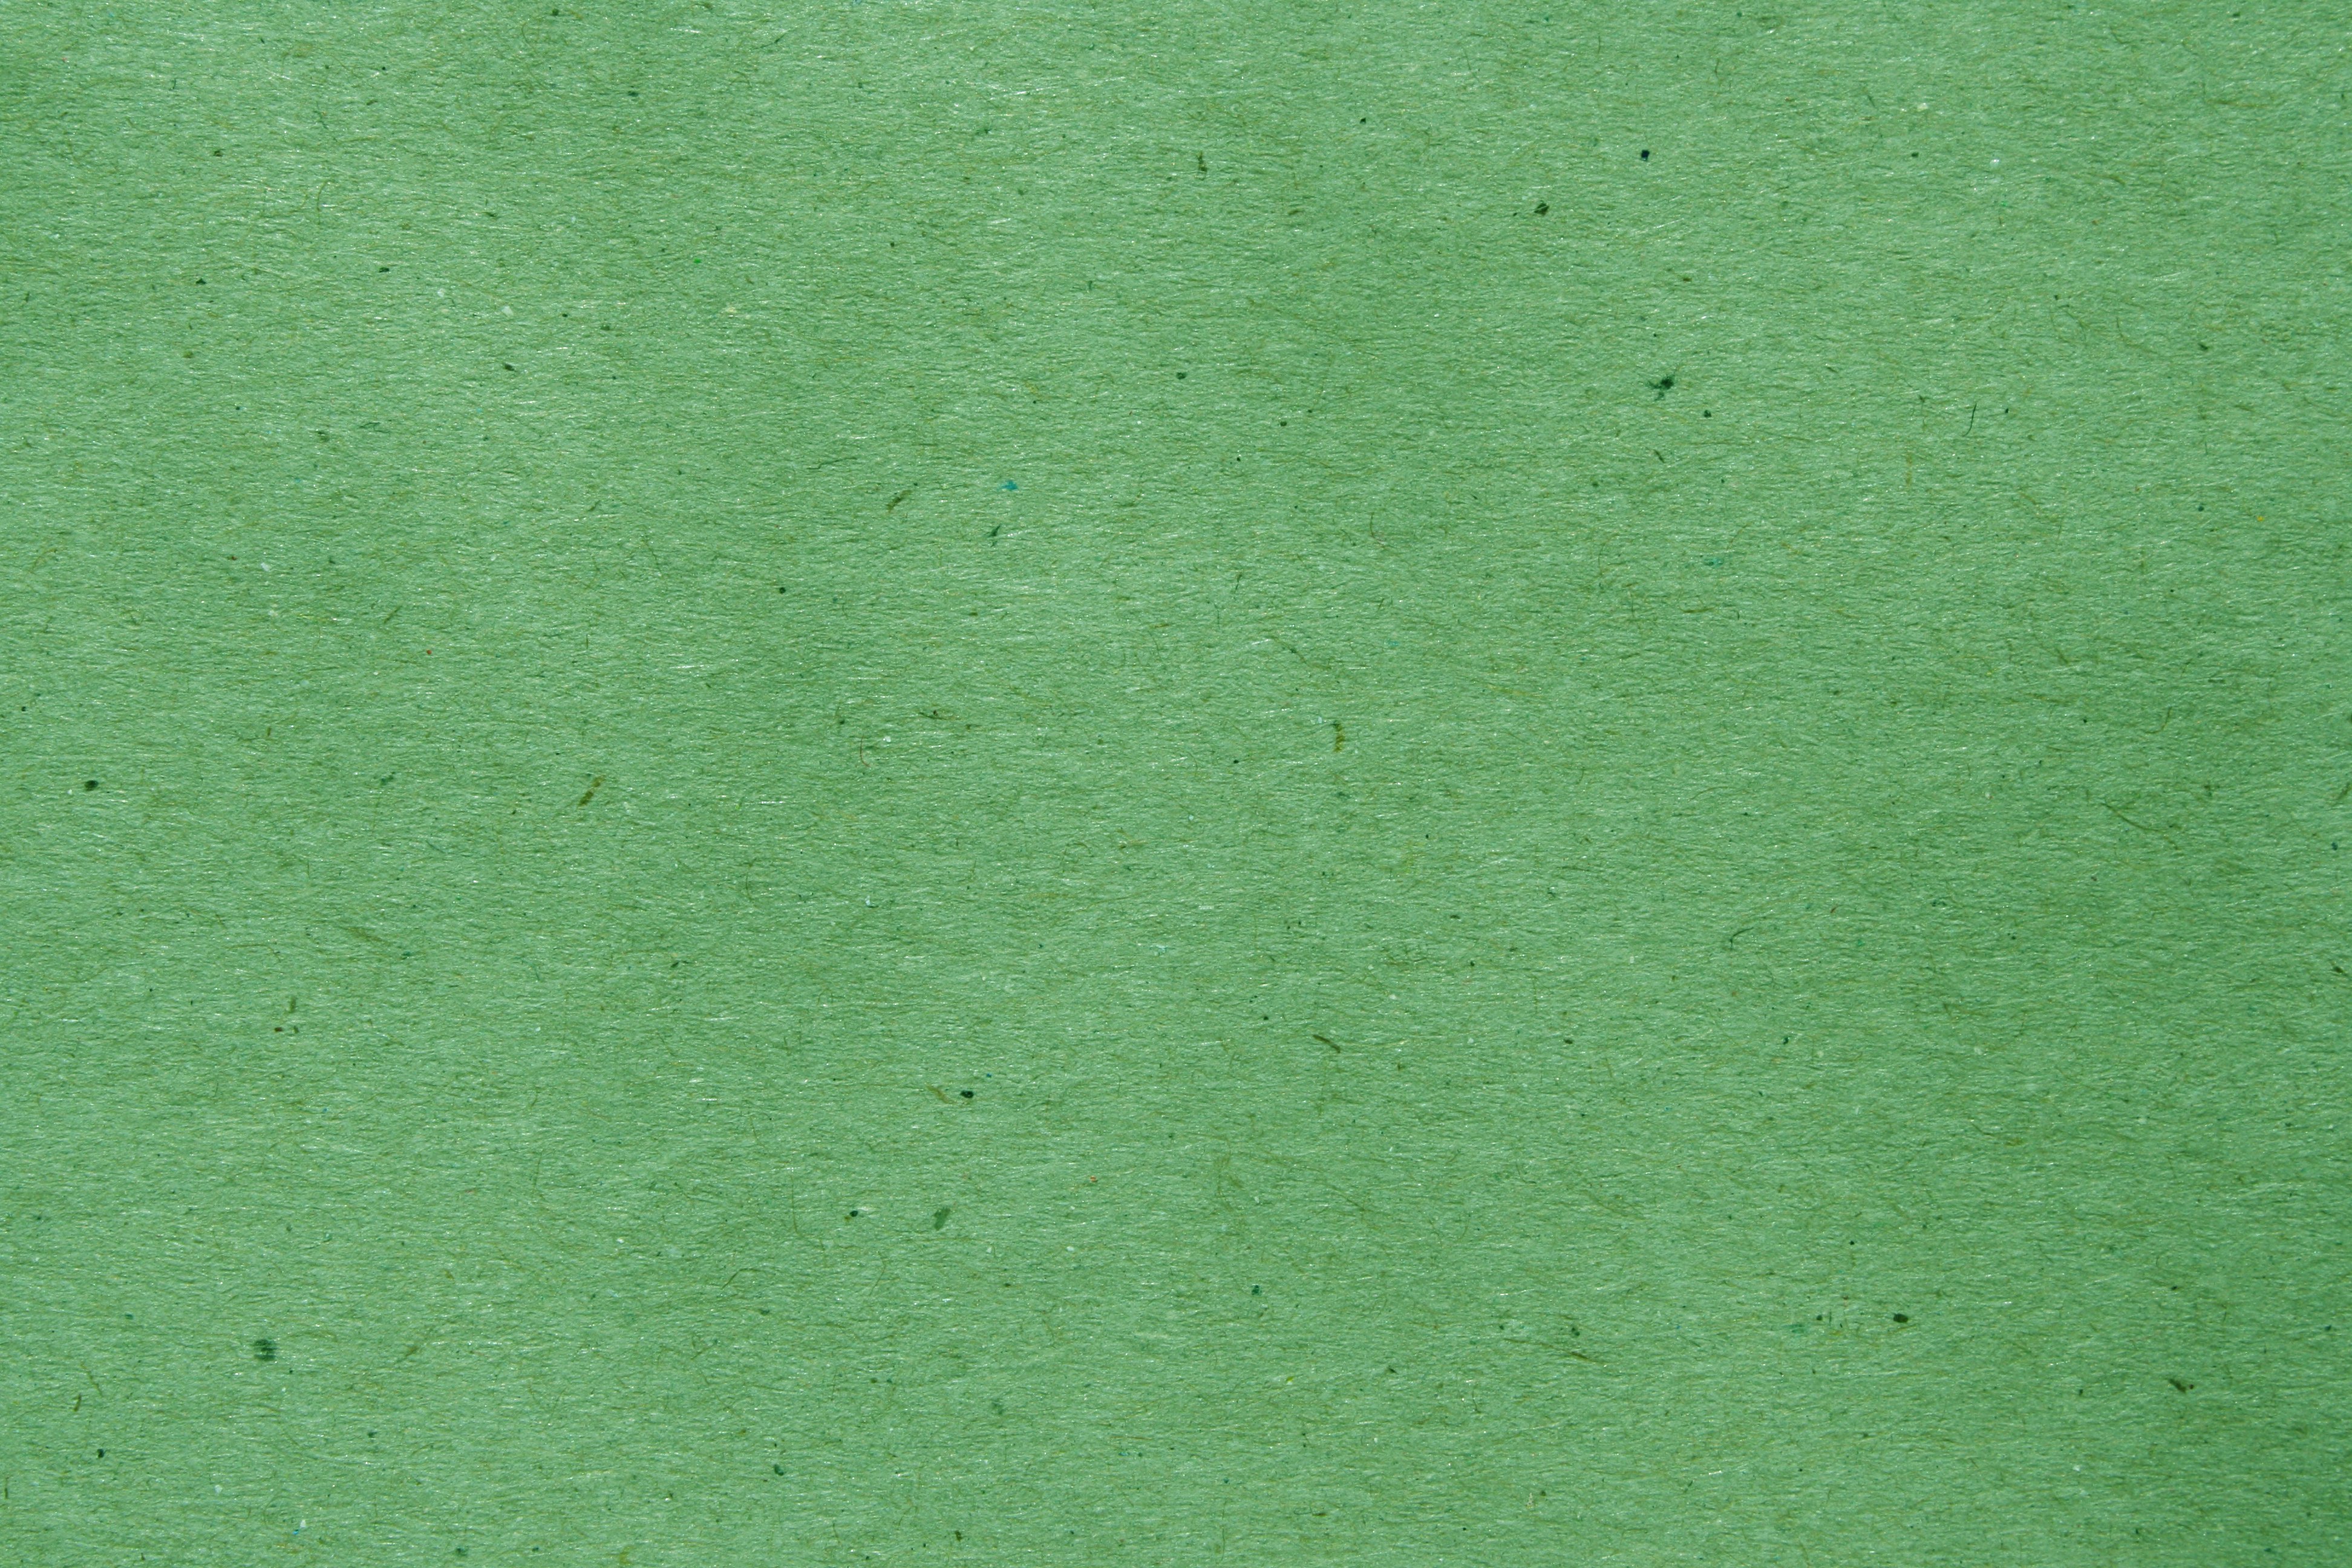 Green Paper Texture with Flecks Picture, Free Photograph